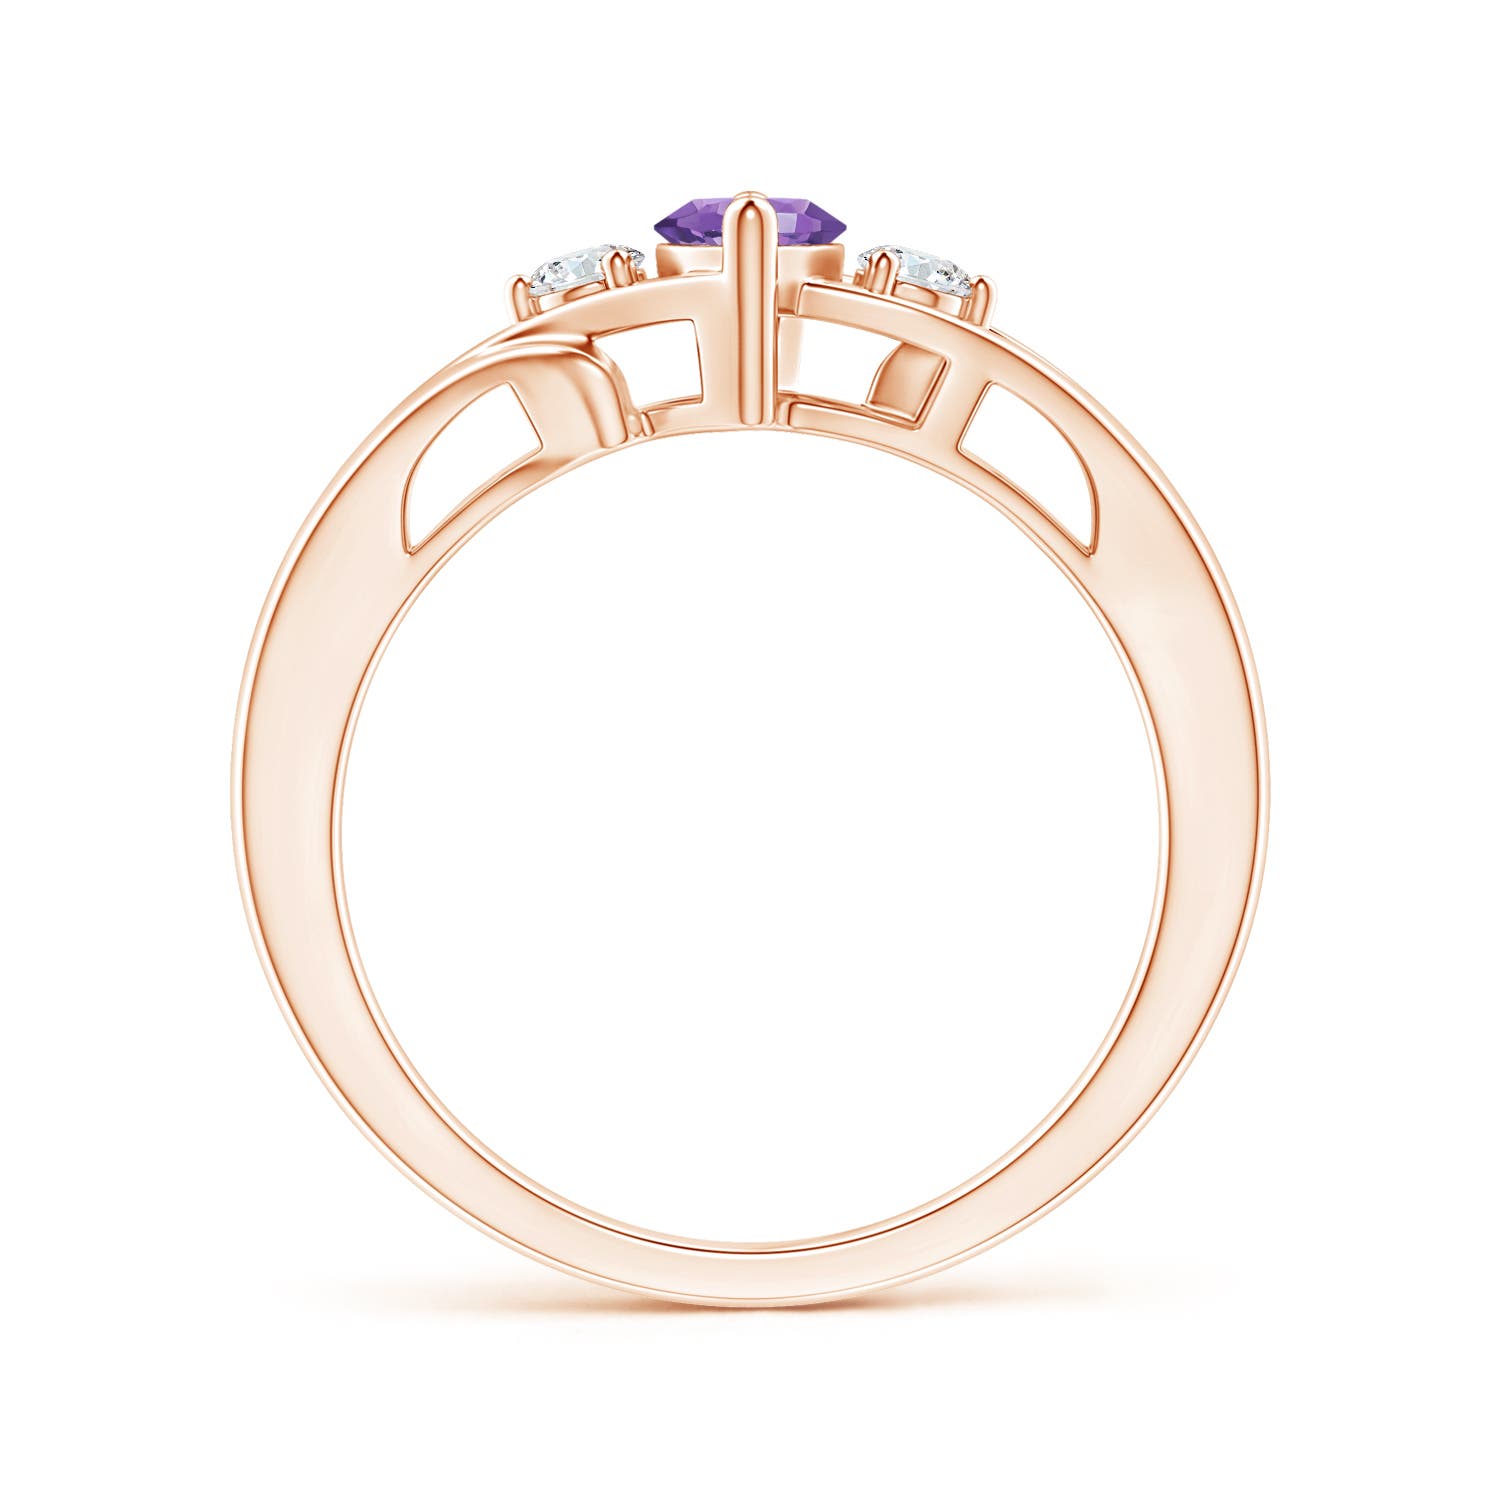 AA - Amethyst / 0.64 CT / 14 KT Rose Gold